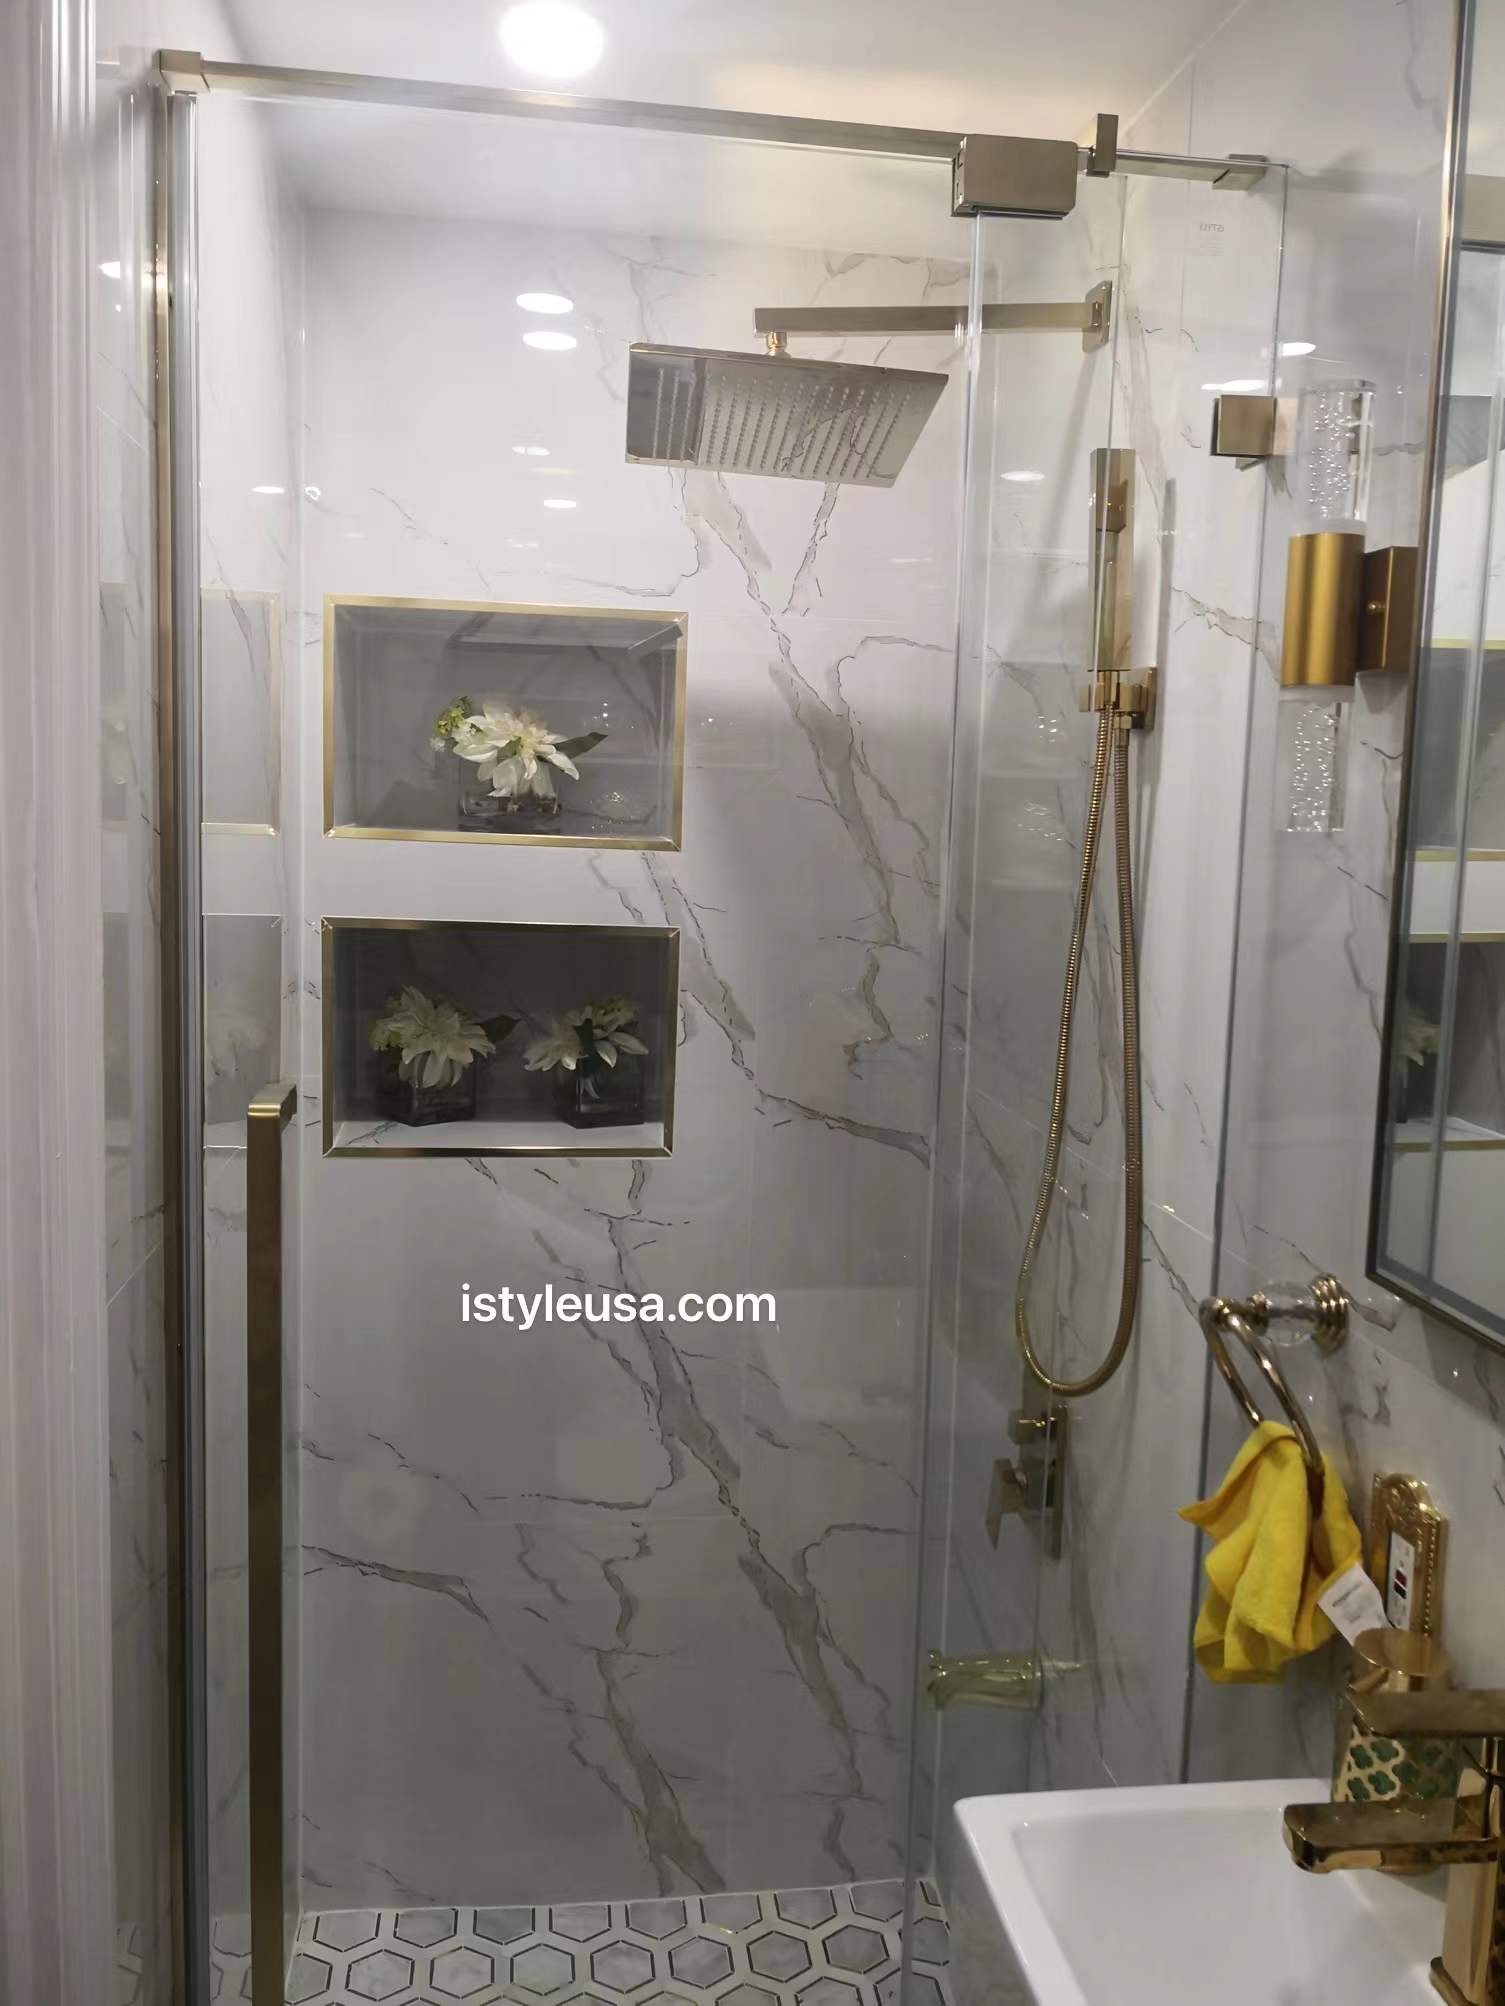 36" Frameless Swing Shower Door with Klearteck Treatment (Brushed Gold) AH01 Series - iStyle Bath